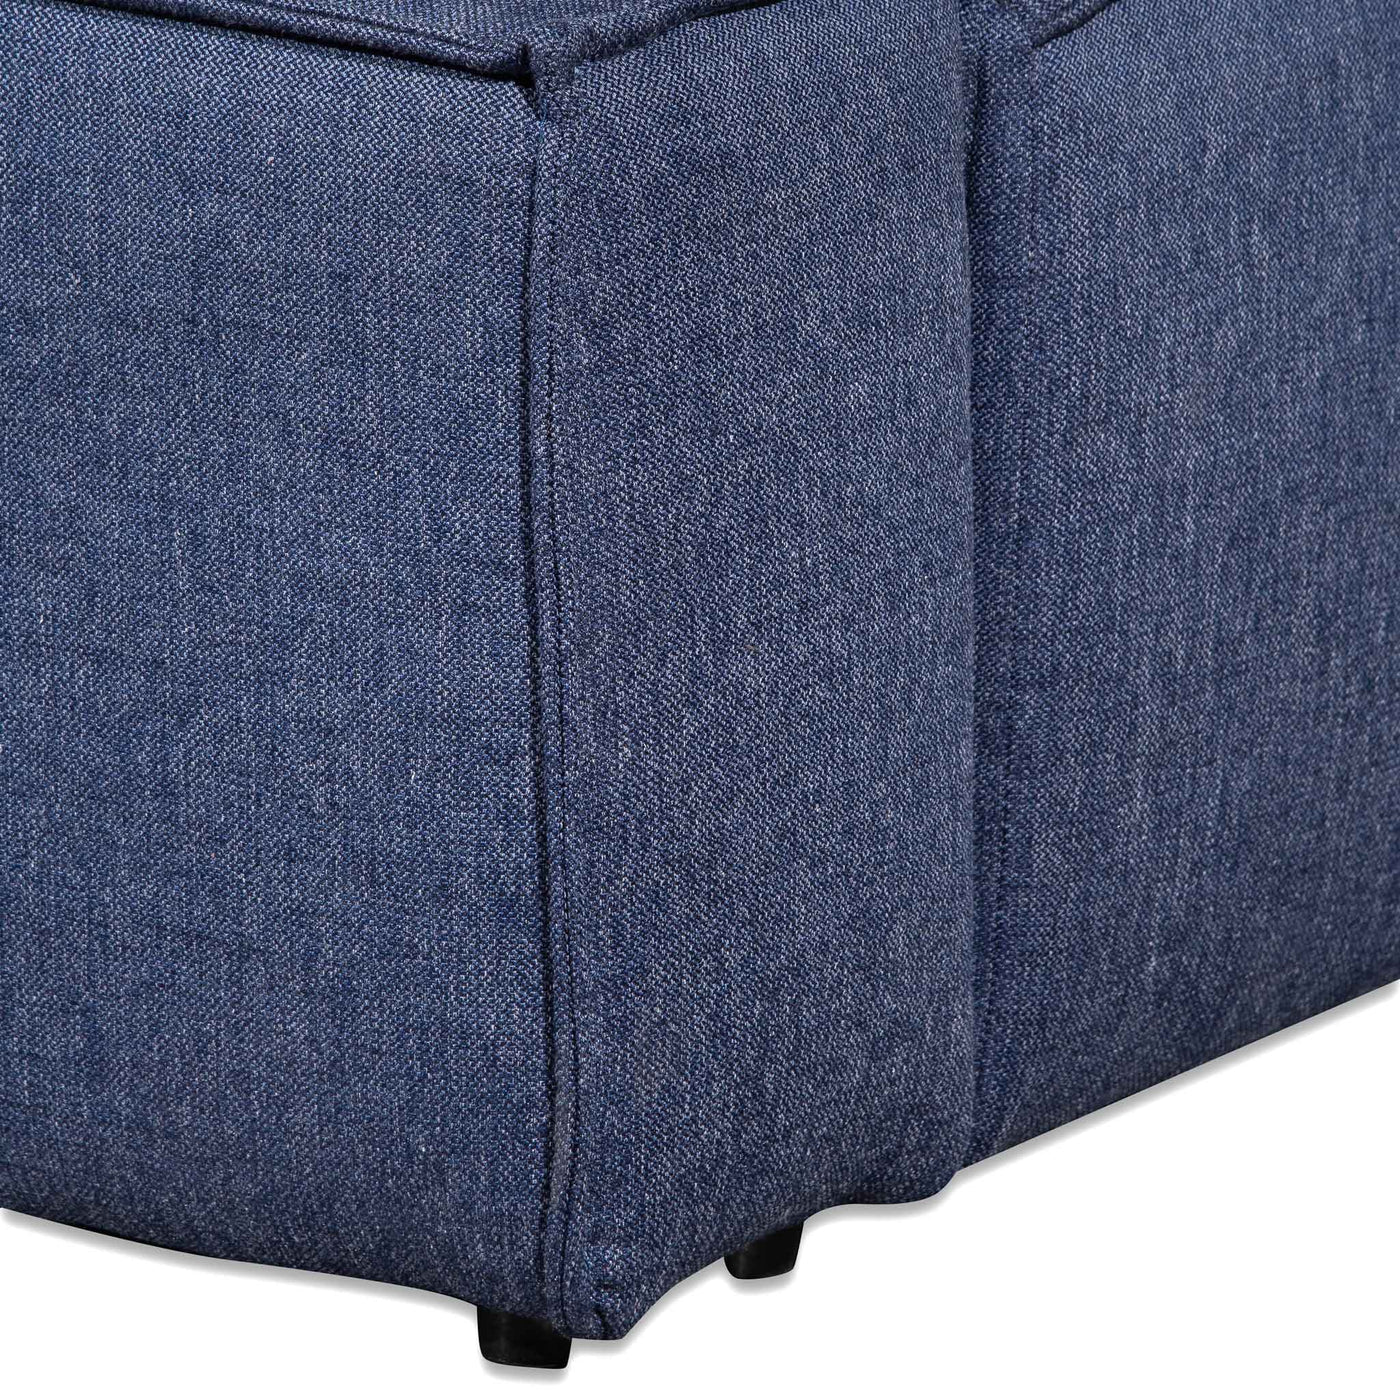 Fabric King Bed Frame - Artic Blue